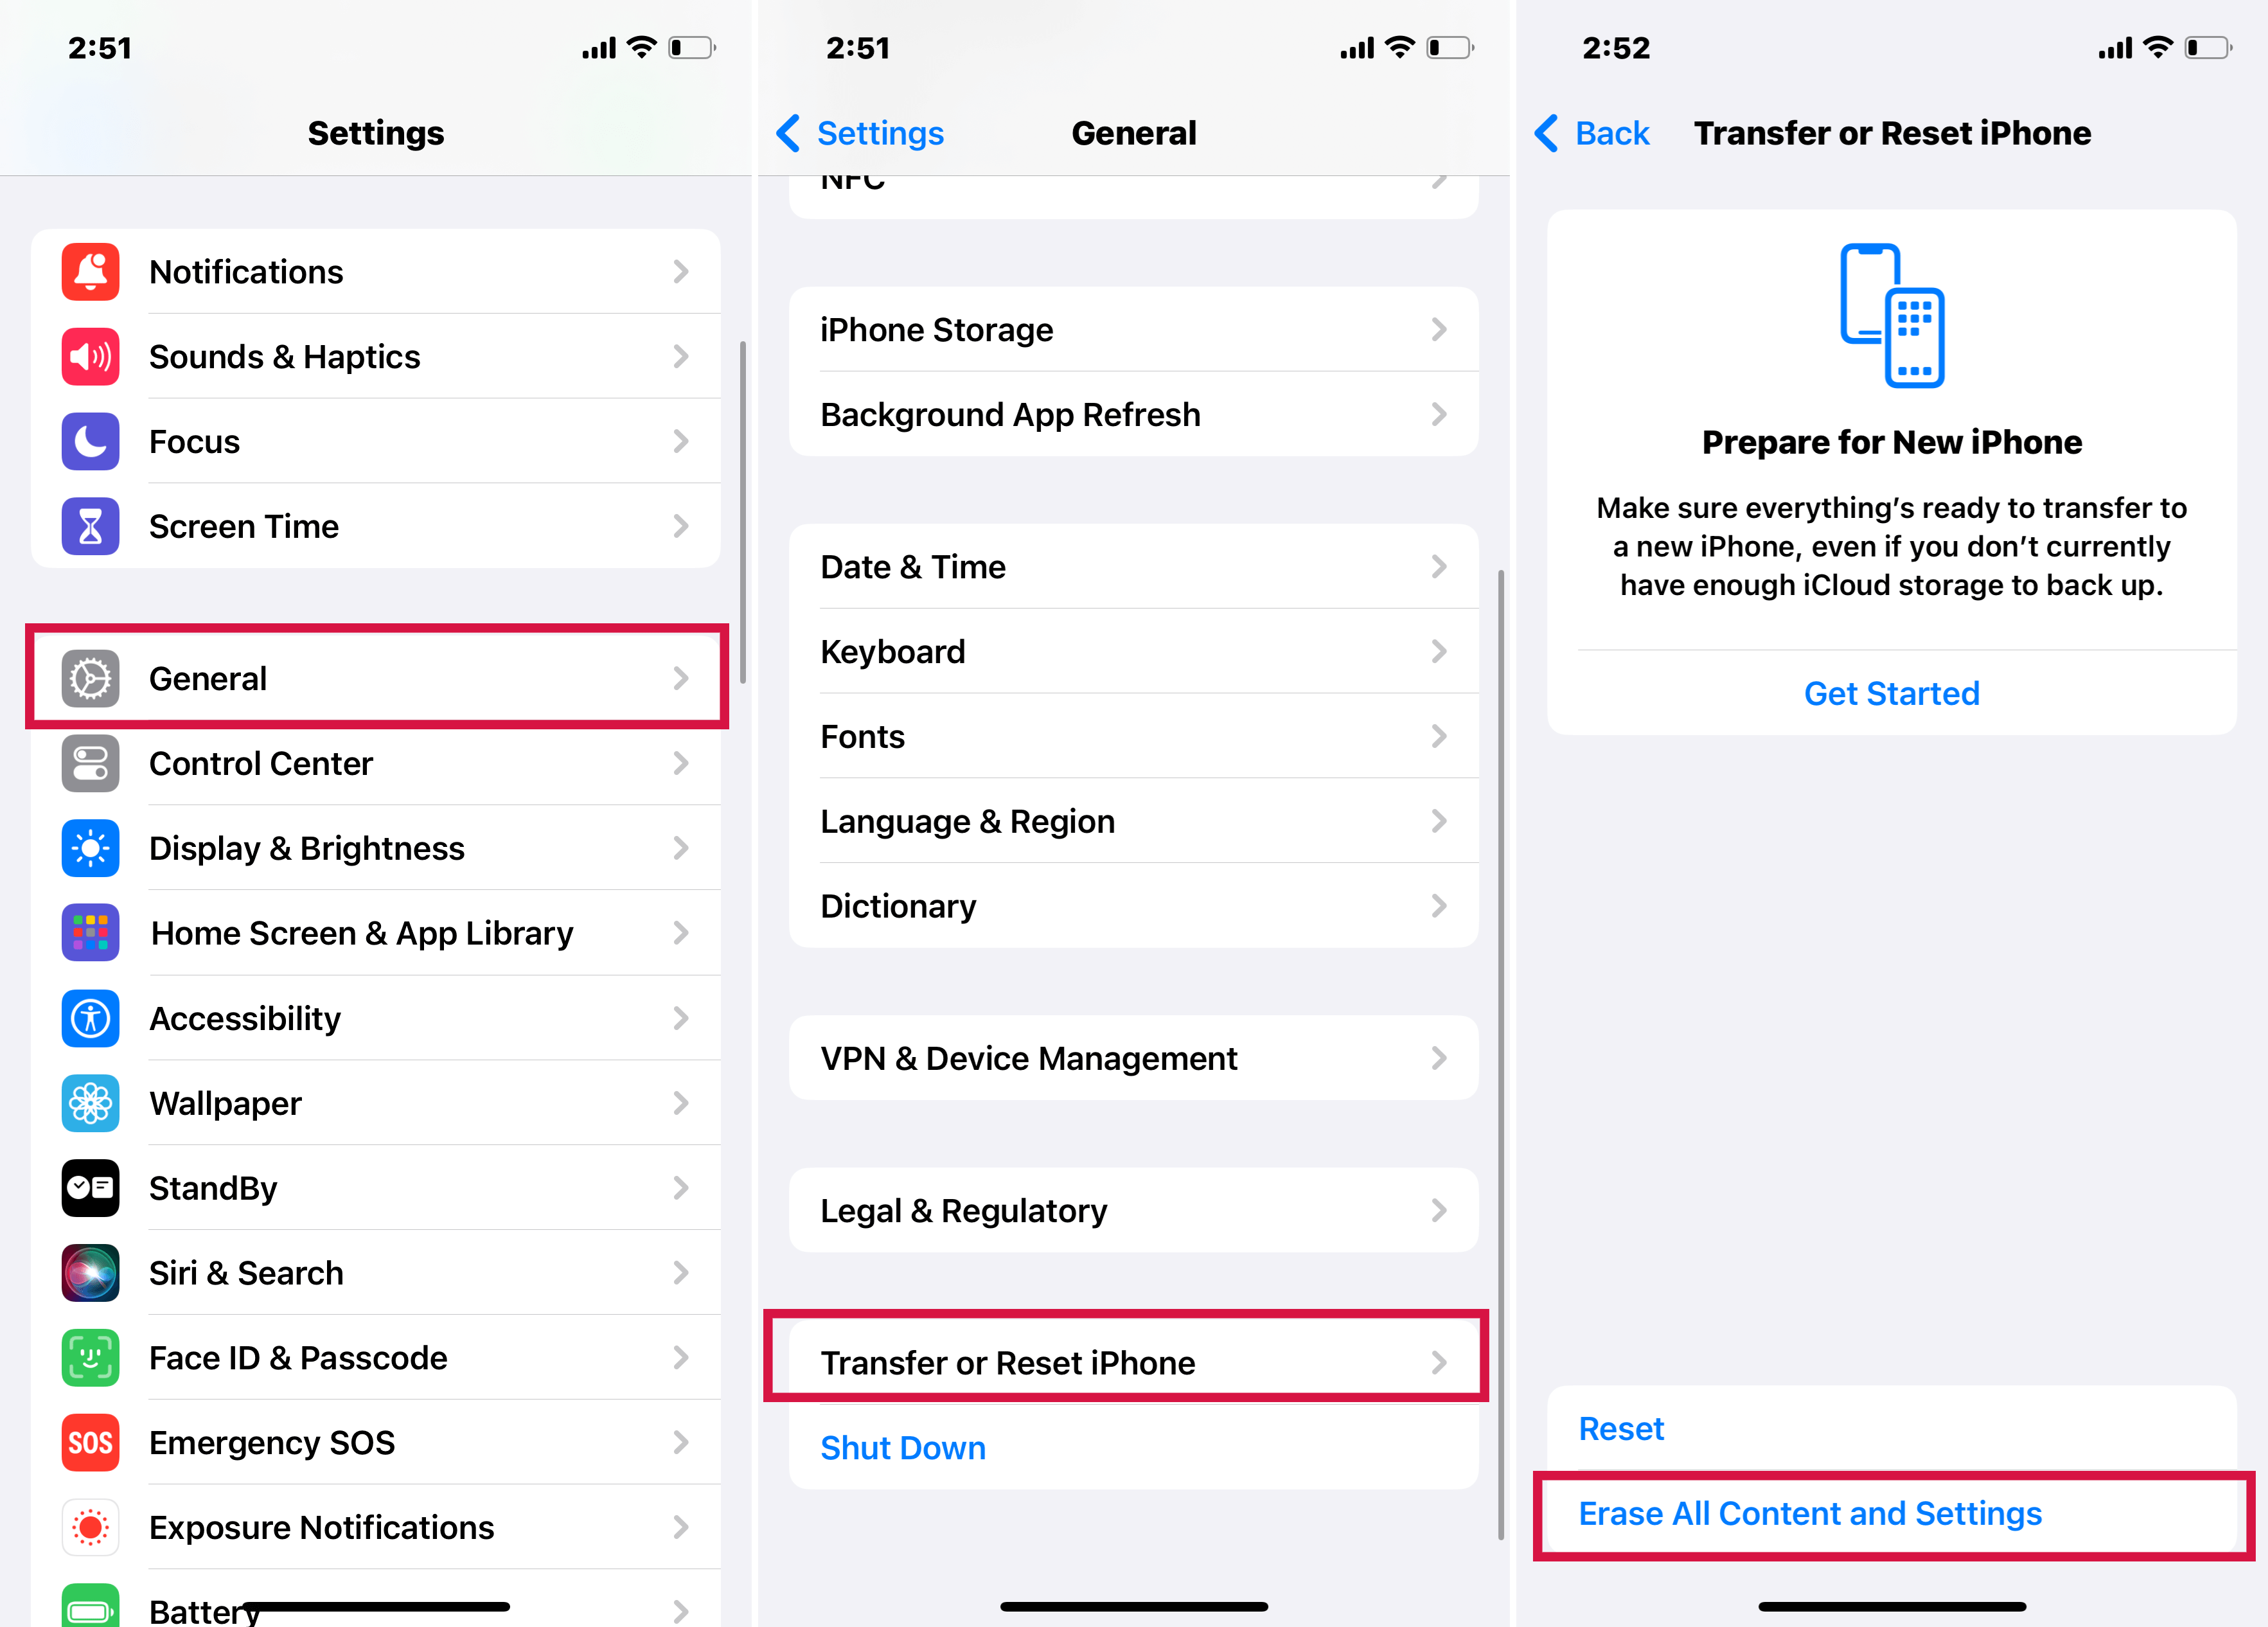 Erase All Contents and Settings on iPhone